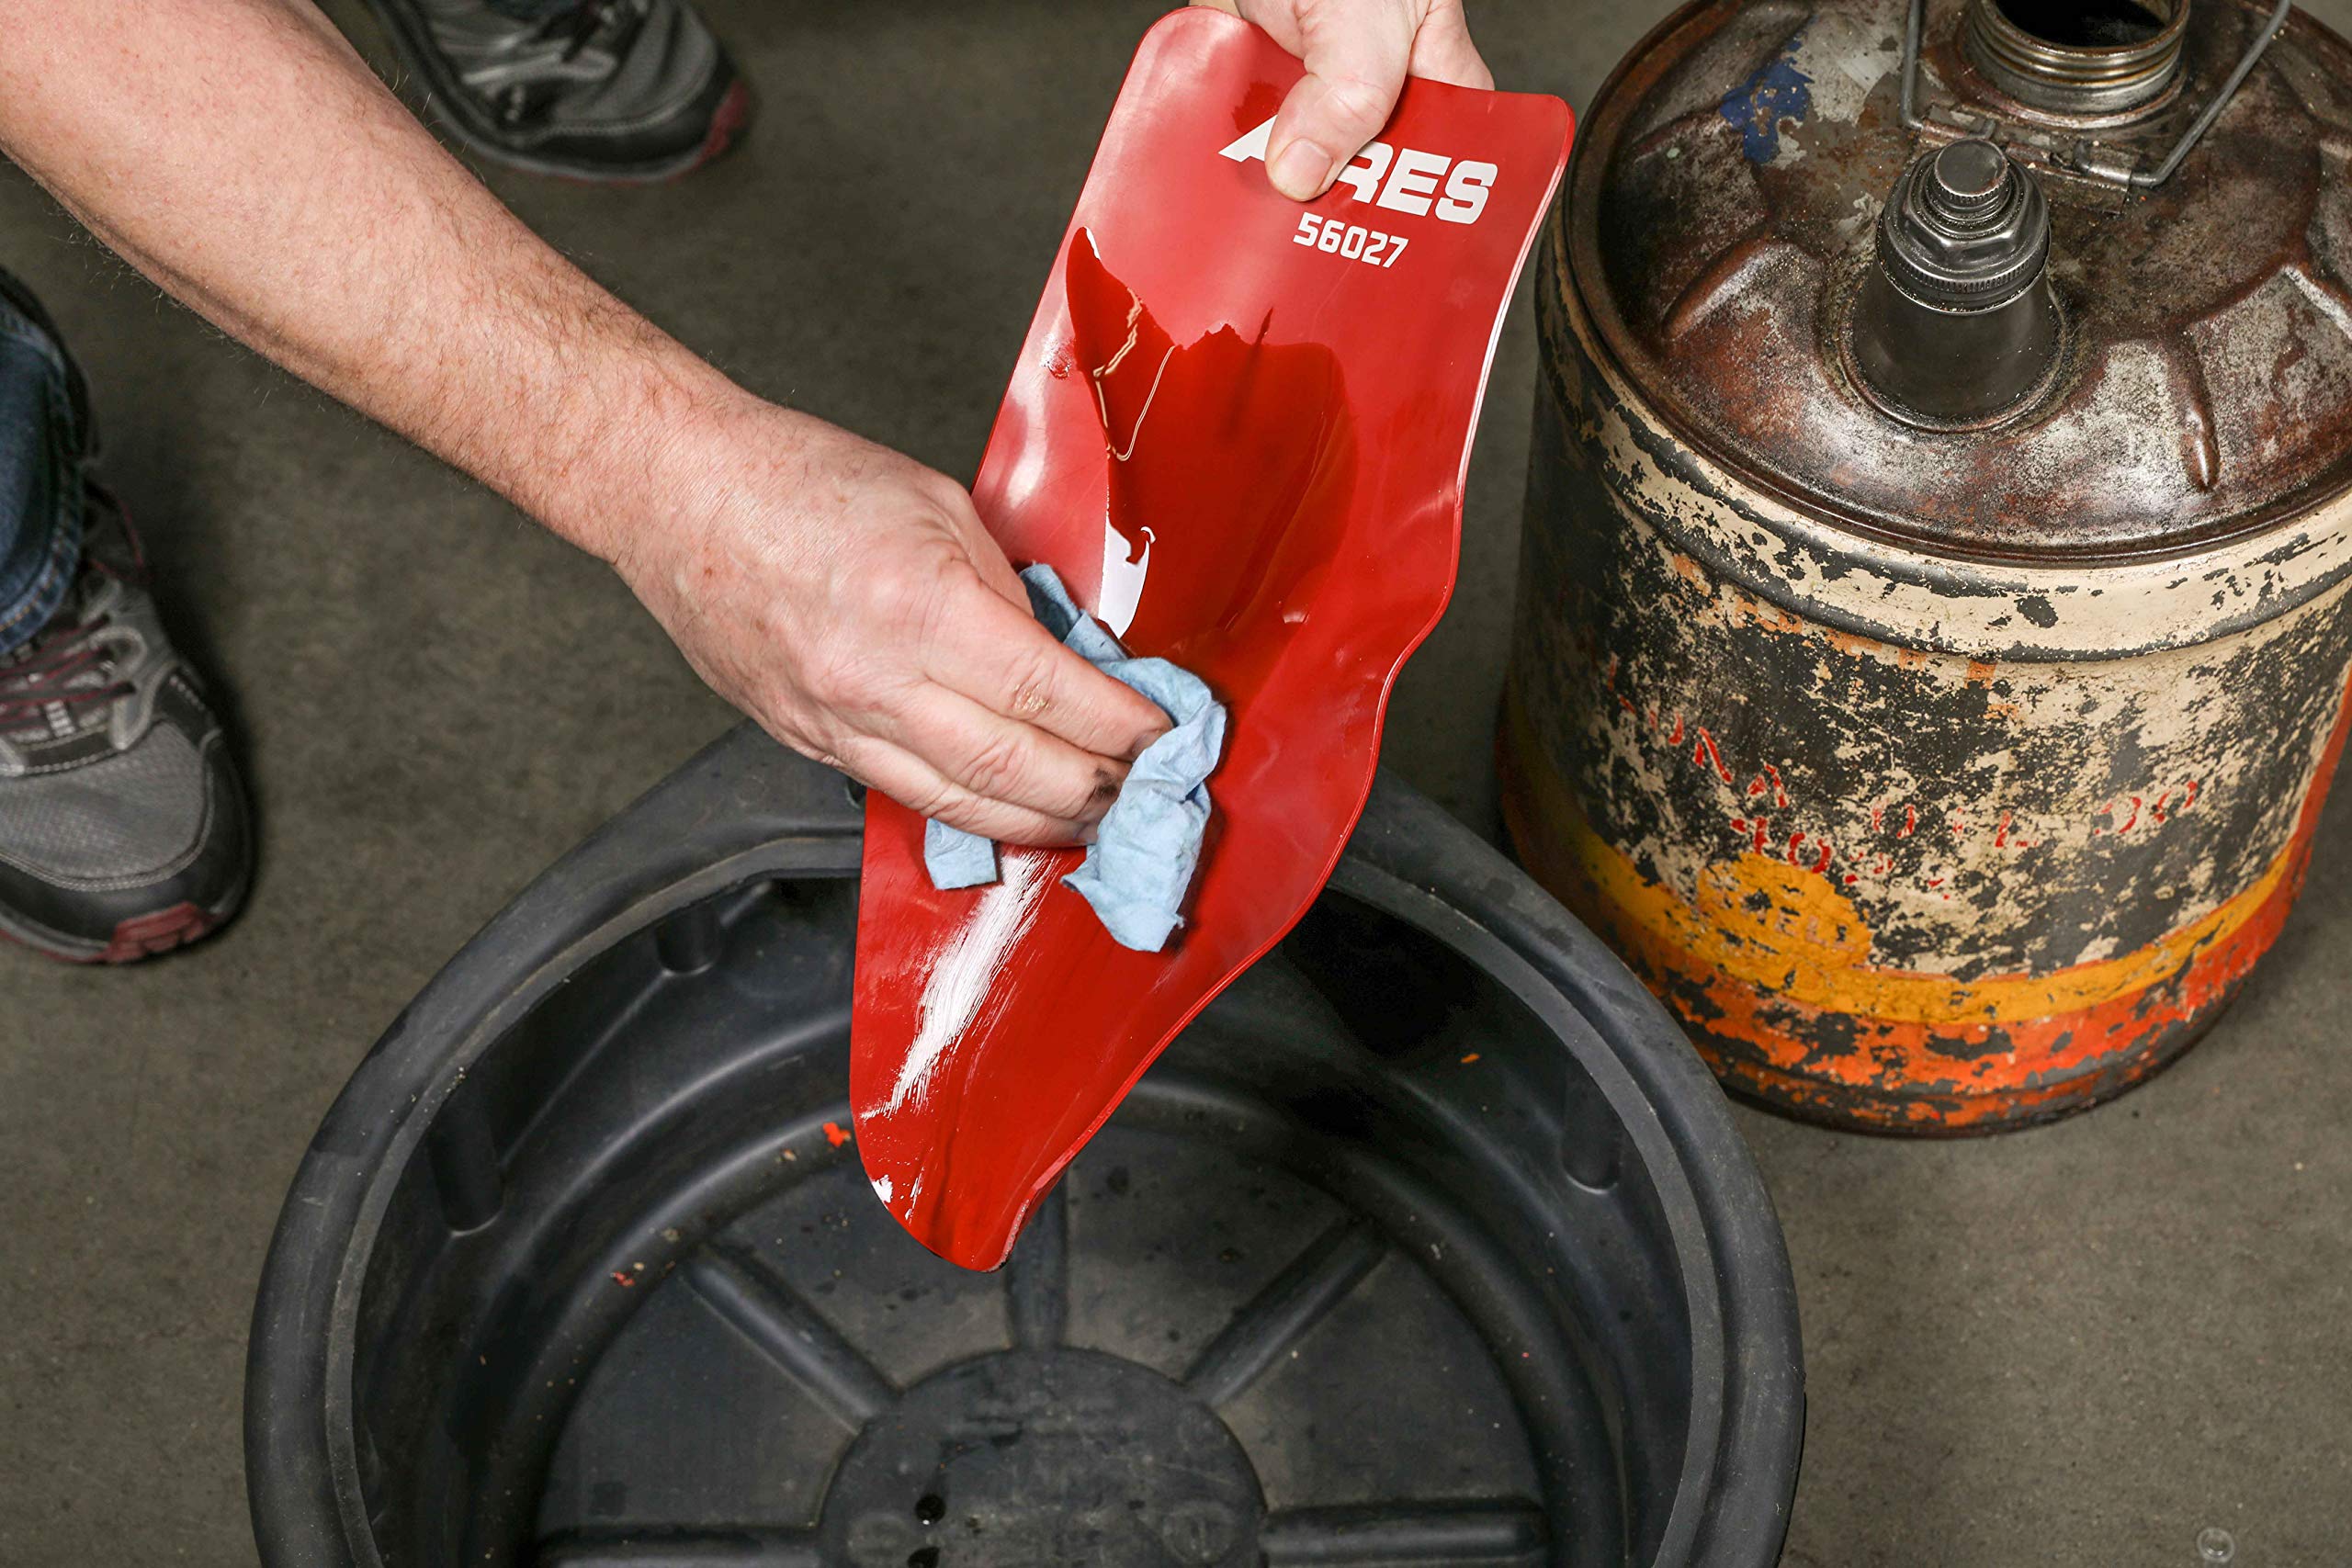 ARES 56027 - Universal Flexible Oil Funnel - Spill-Free Oil Filling - Easy to Use 1-Person Design - Fits Multiple Applications